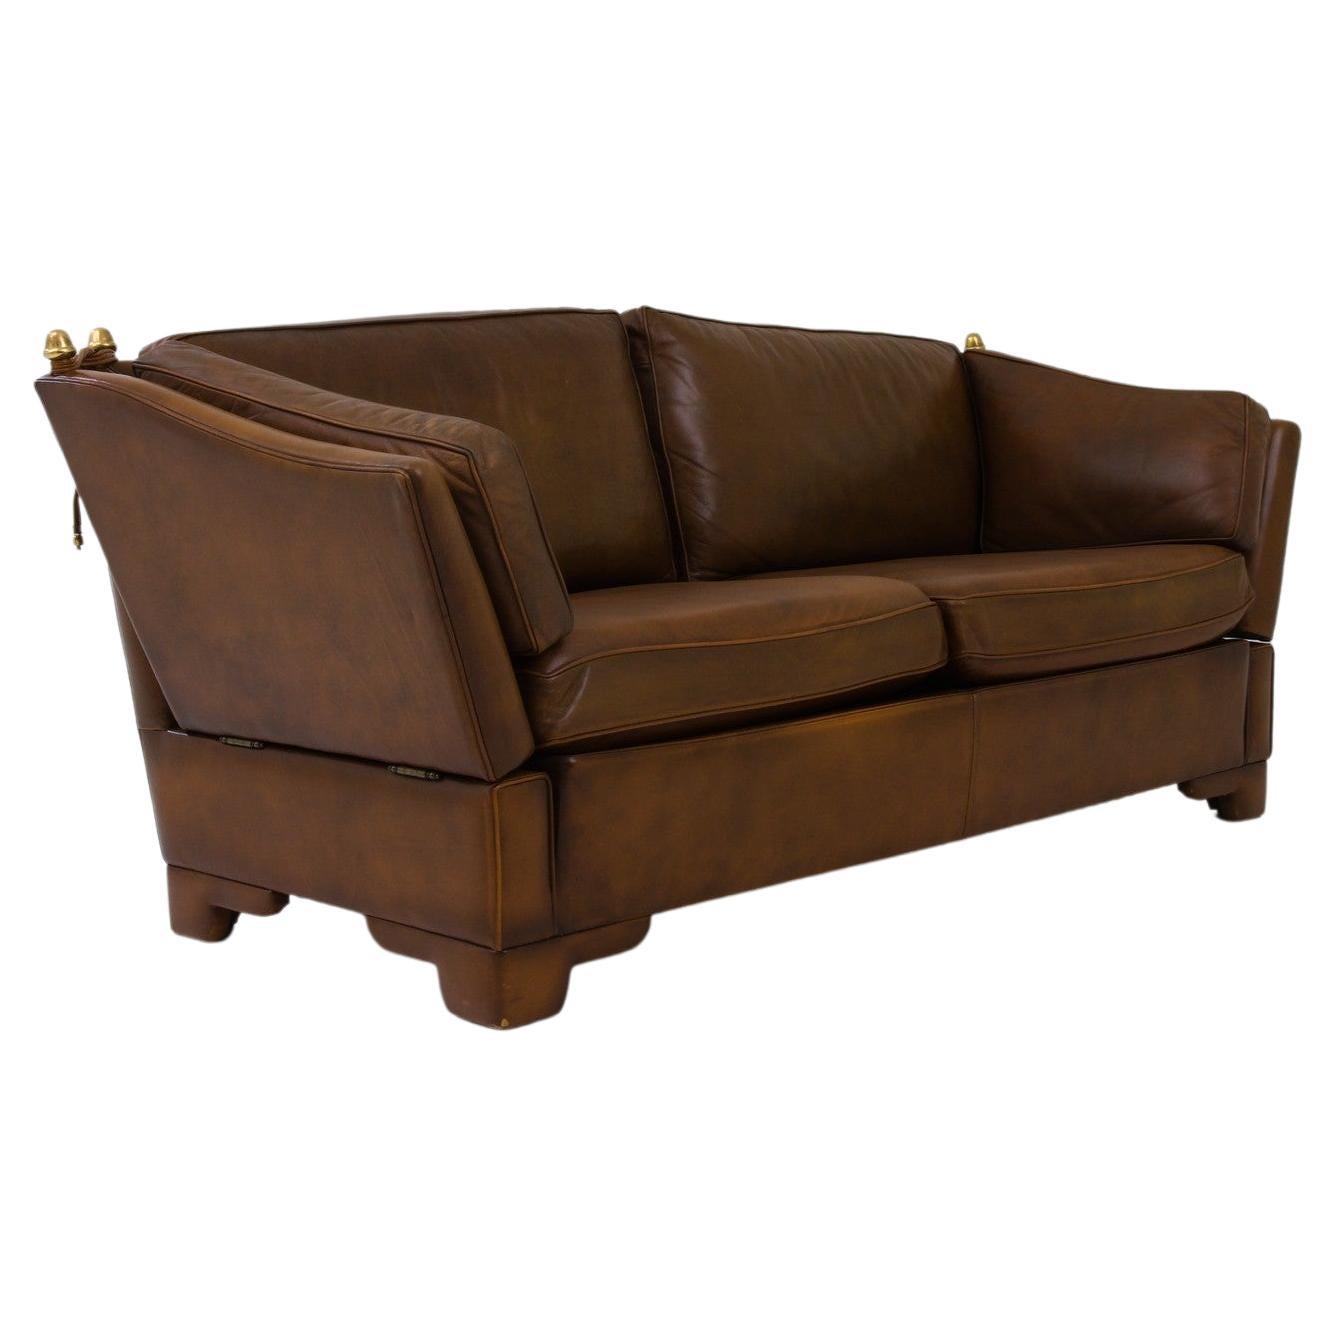 1970s British Leather Loveseat For Sale